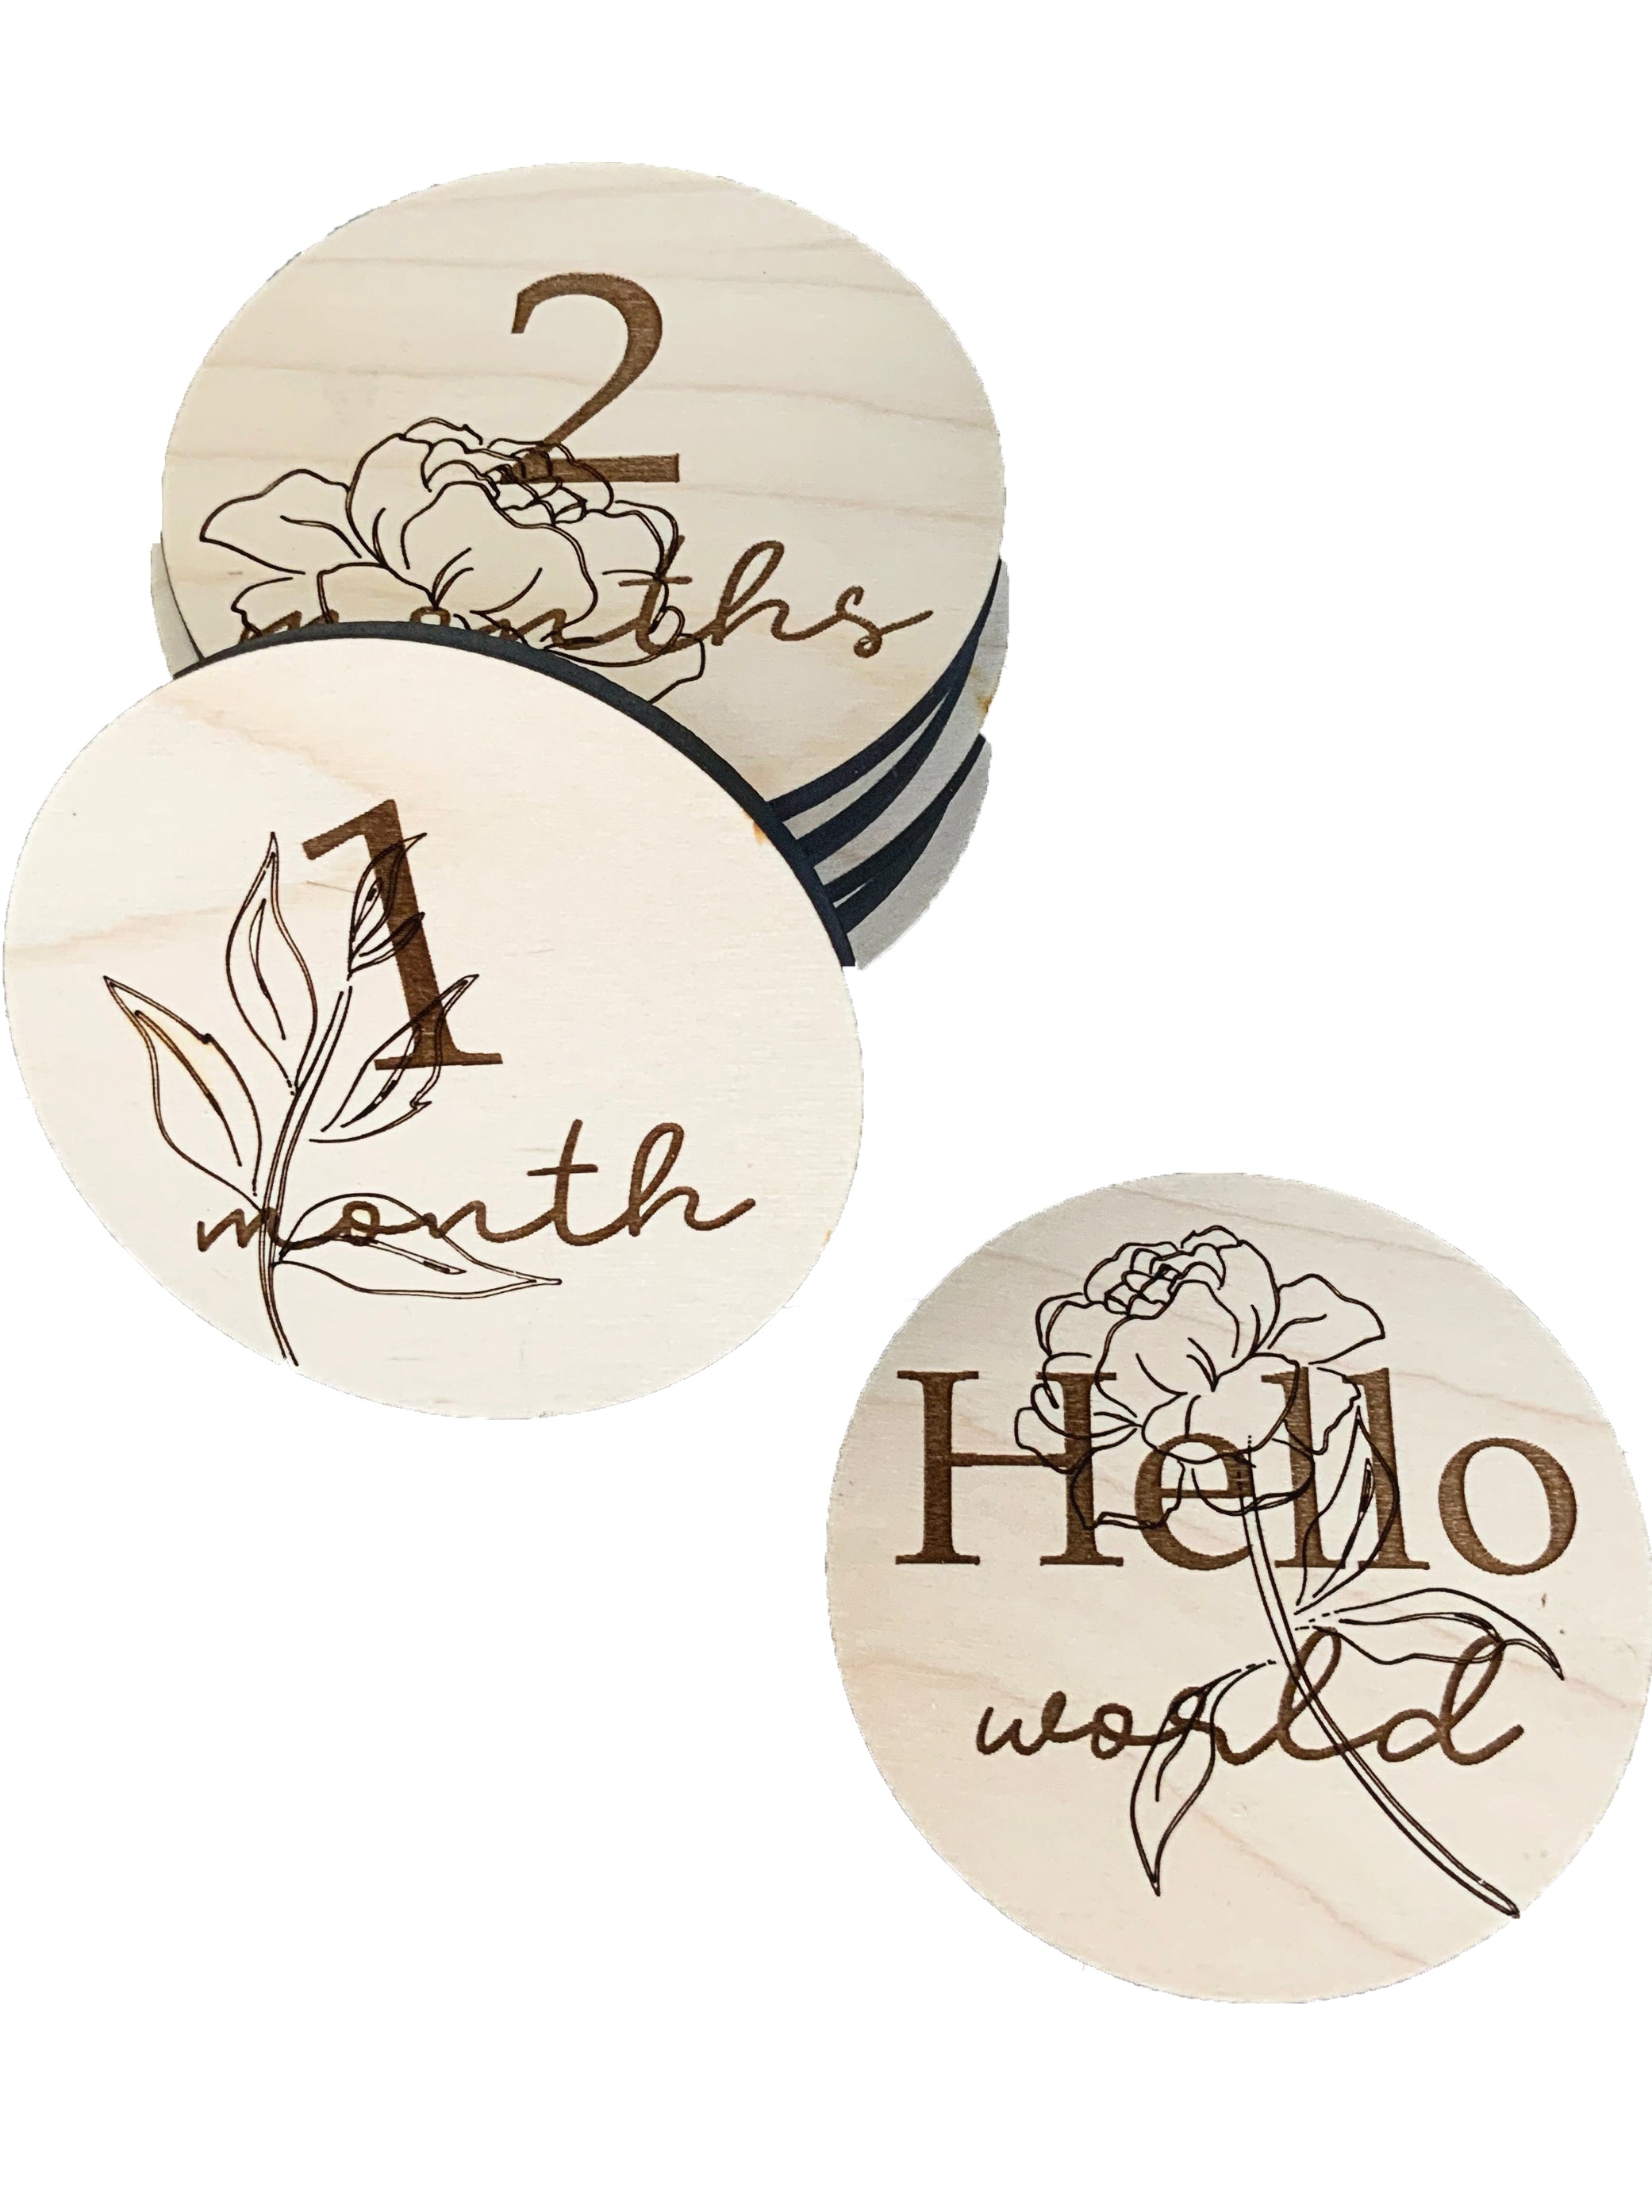 Wooden Milestone Discs | Charming Finds